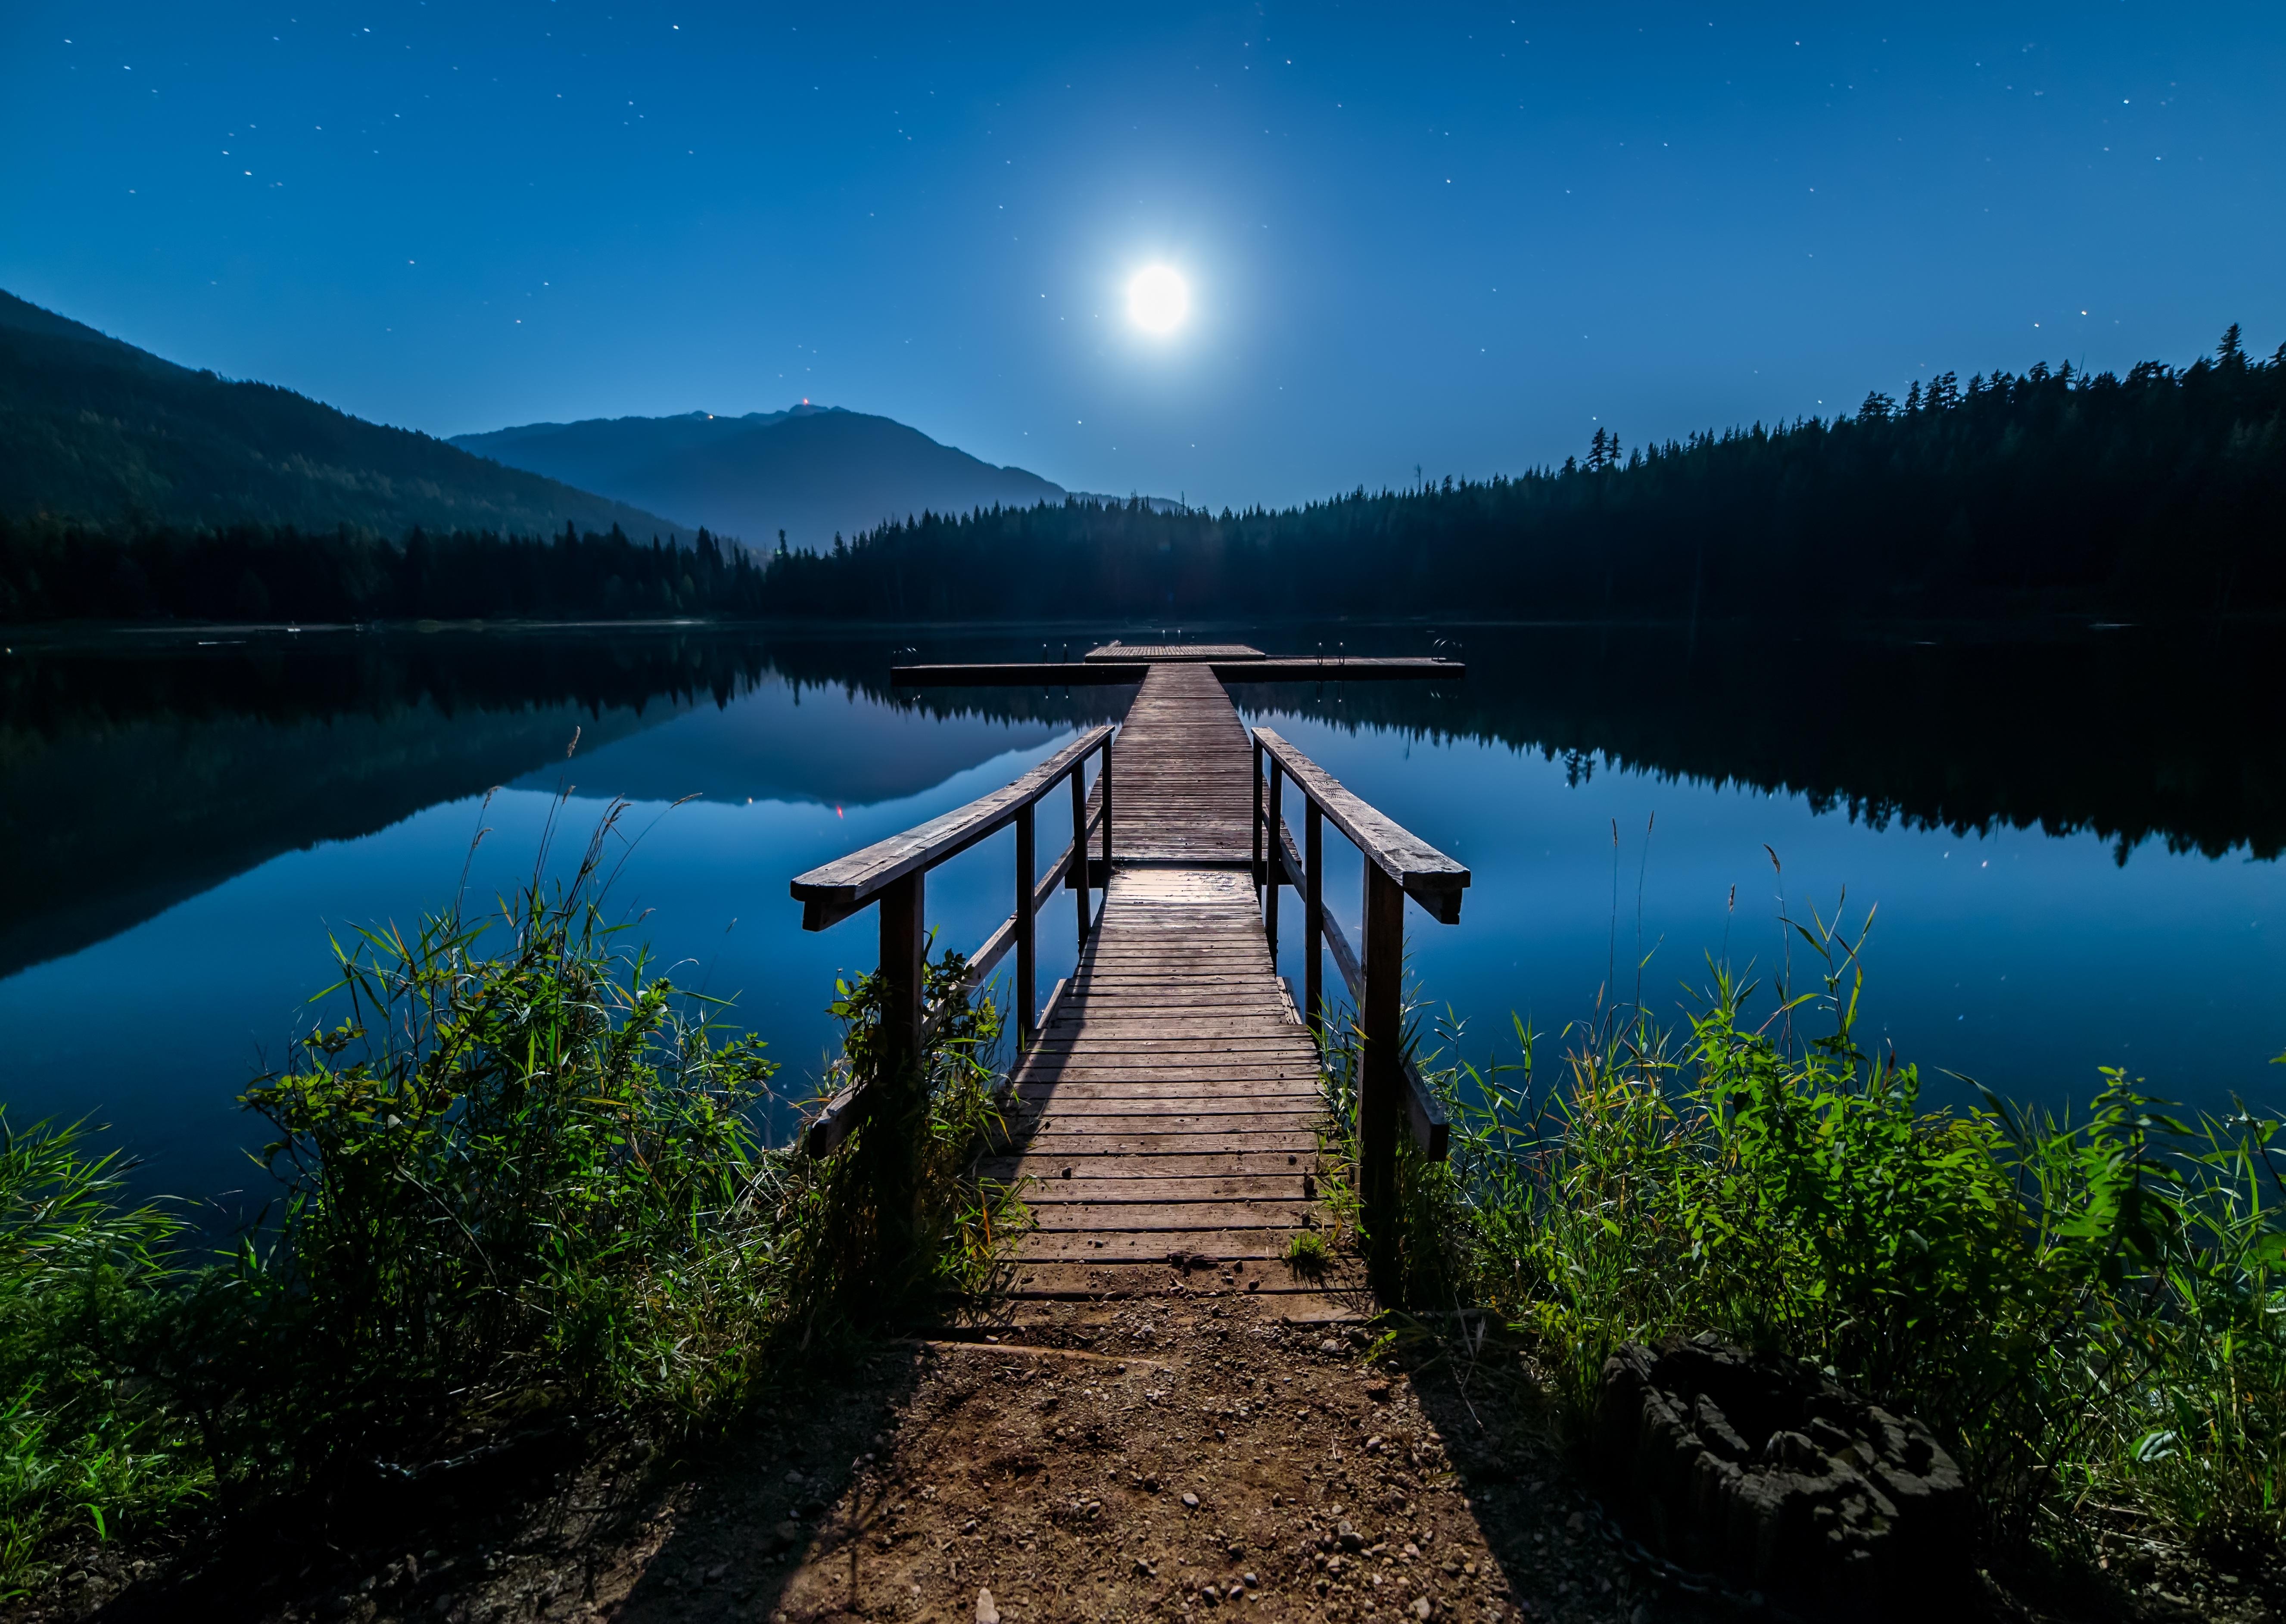 Night Nature Wallpapers